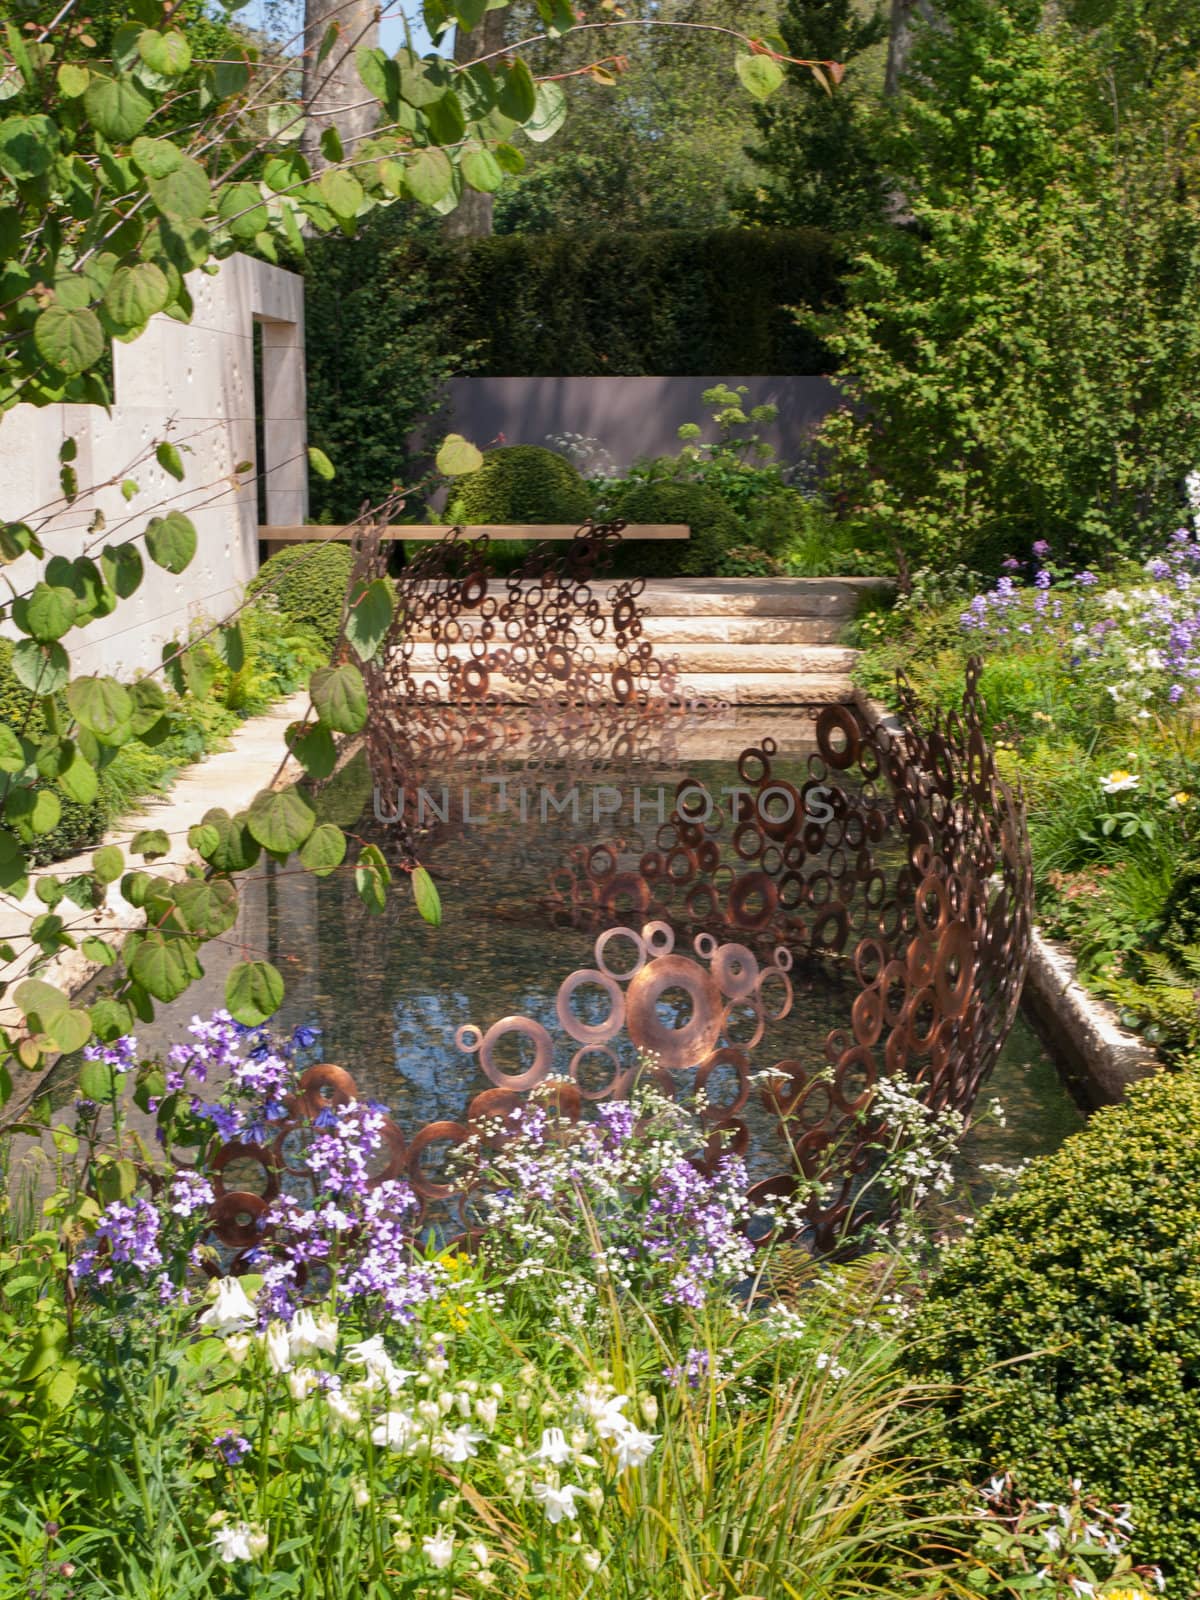 The M&G Garden designed by Andy Sturgeon - Gold Medal Winner